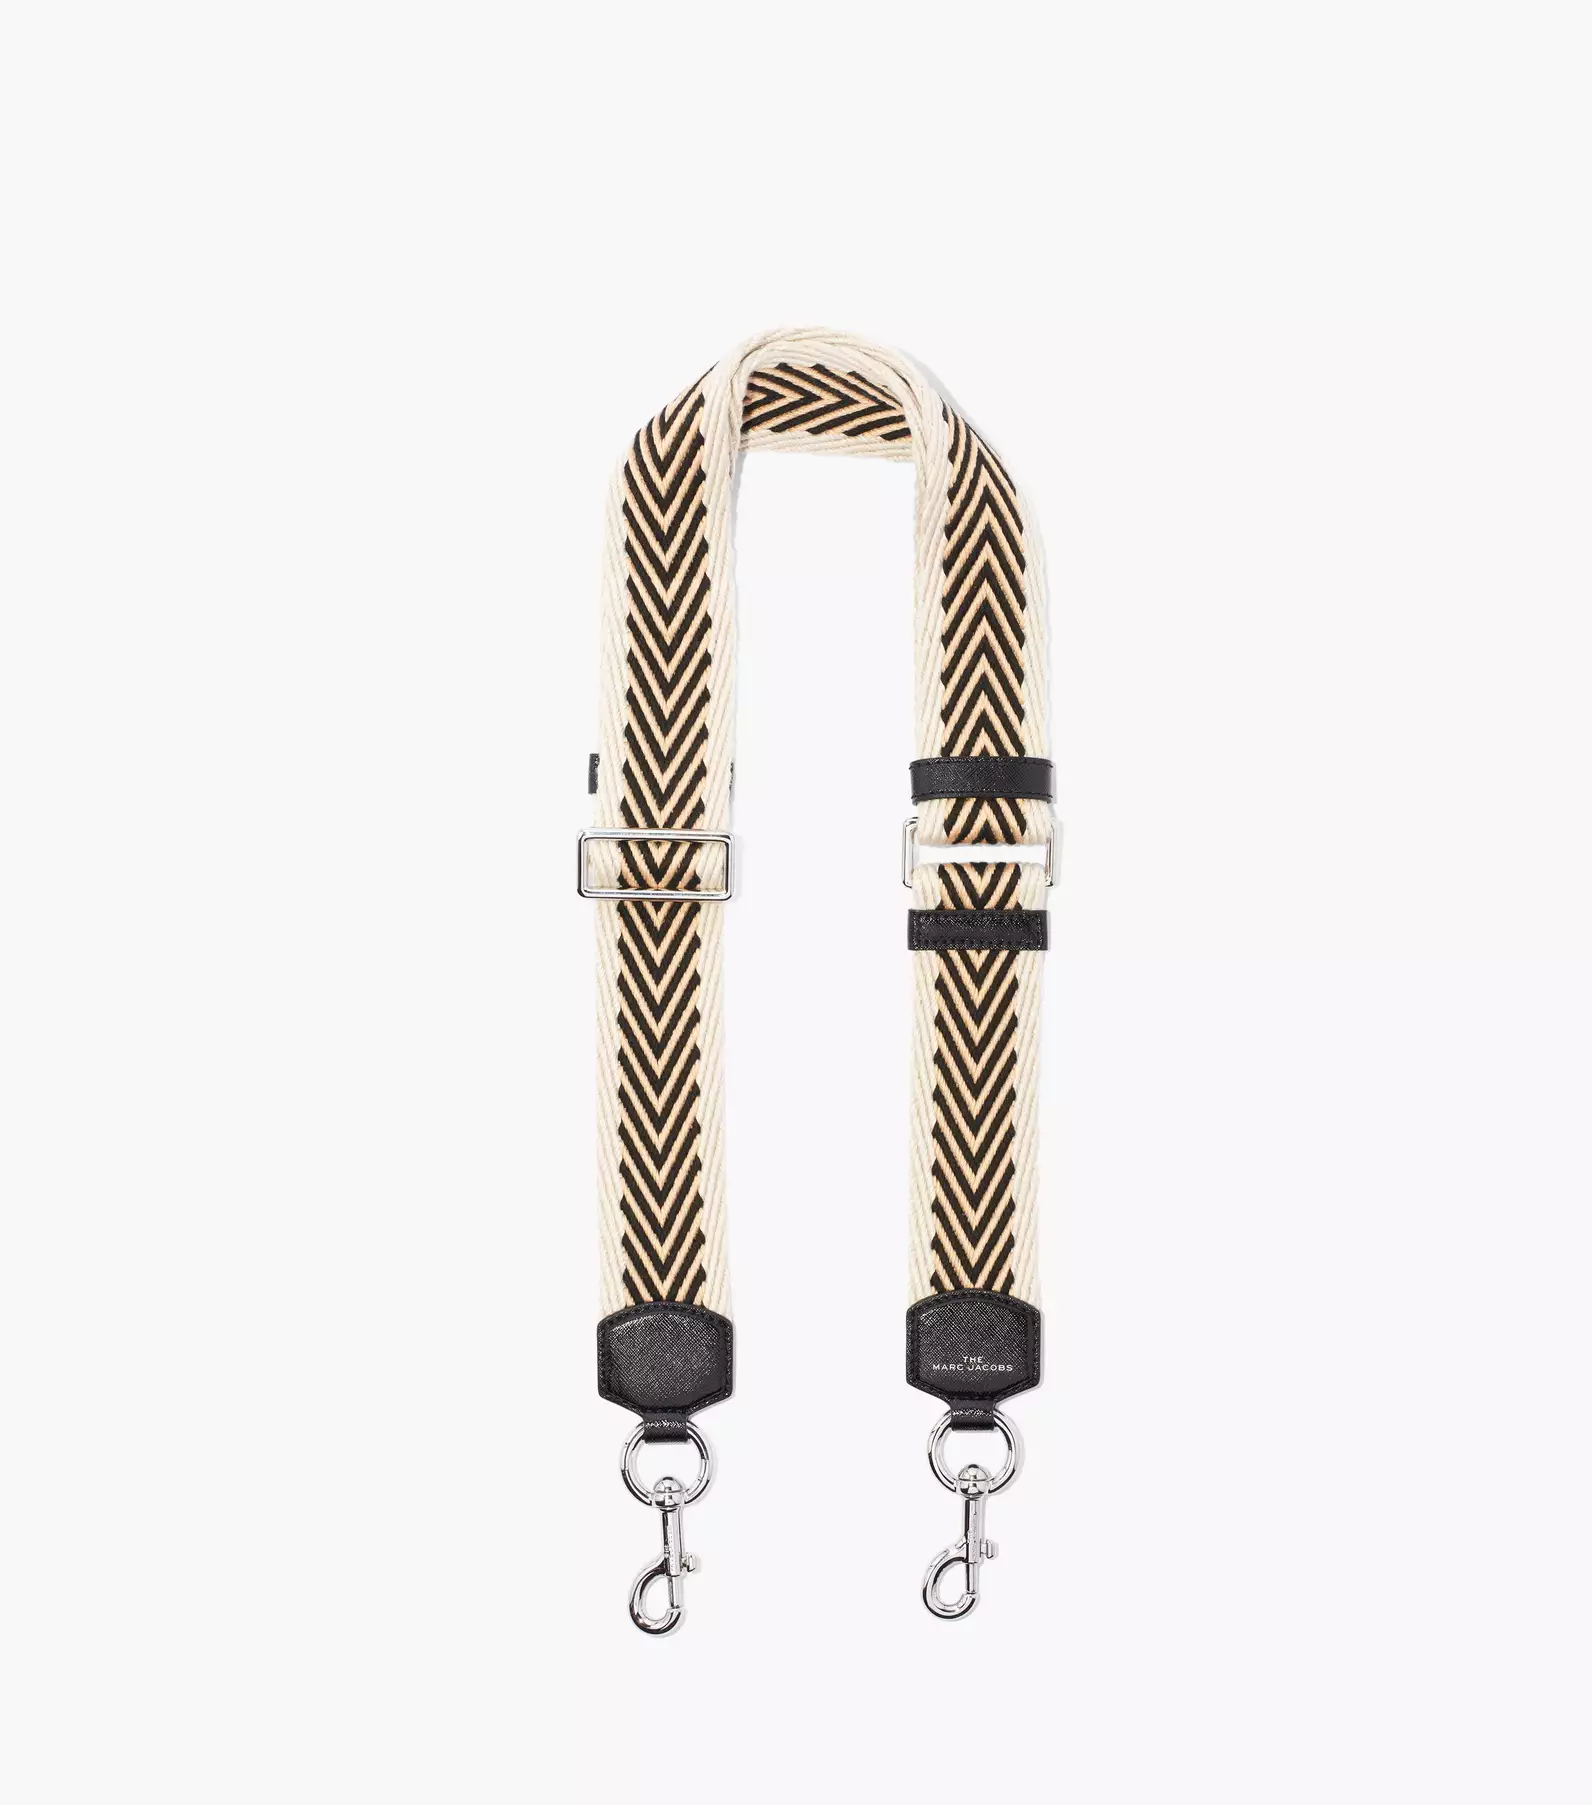  Marc Jacobs The Strap Rose Multi One Size